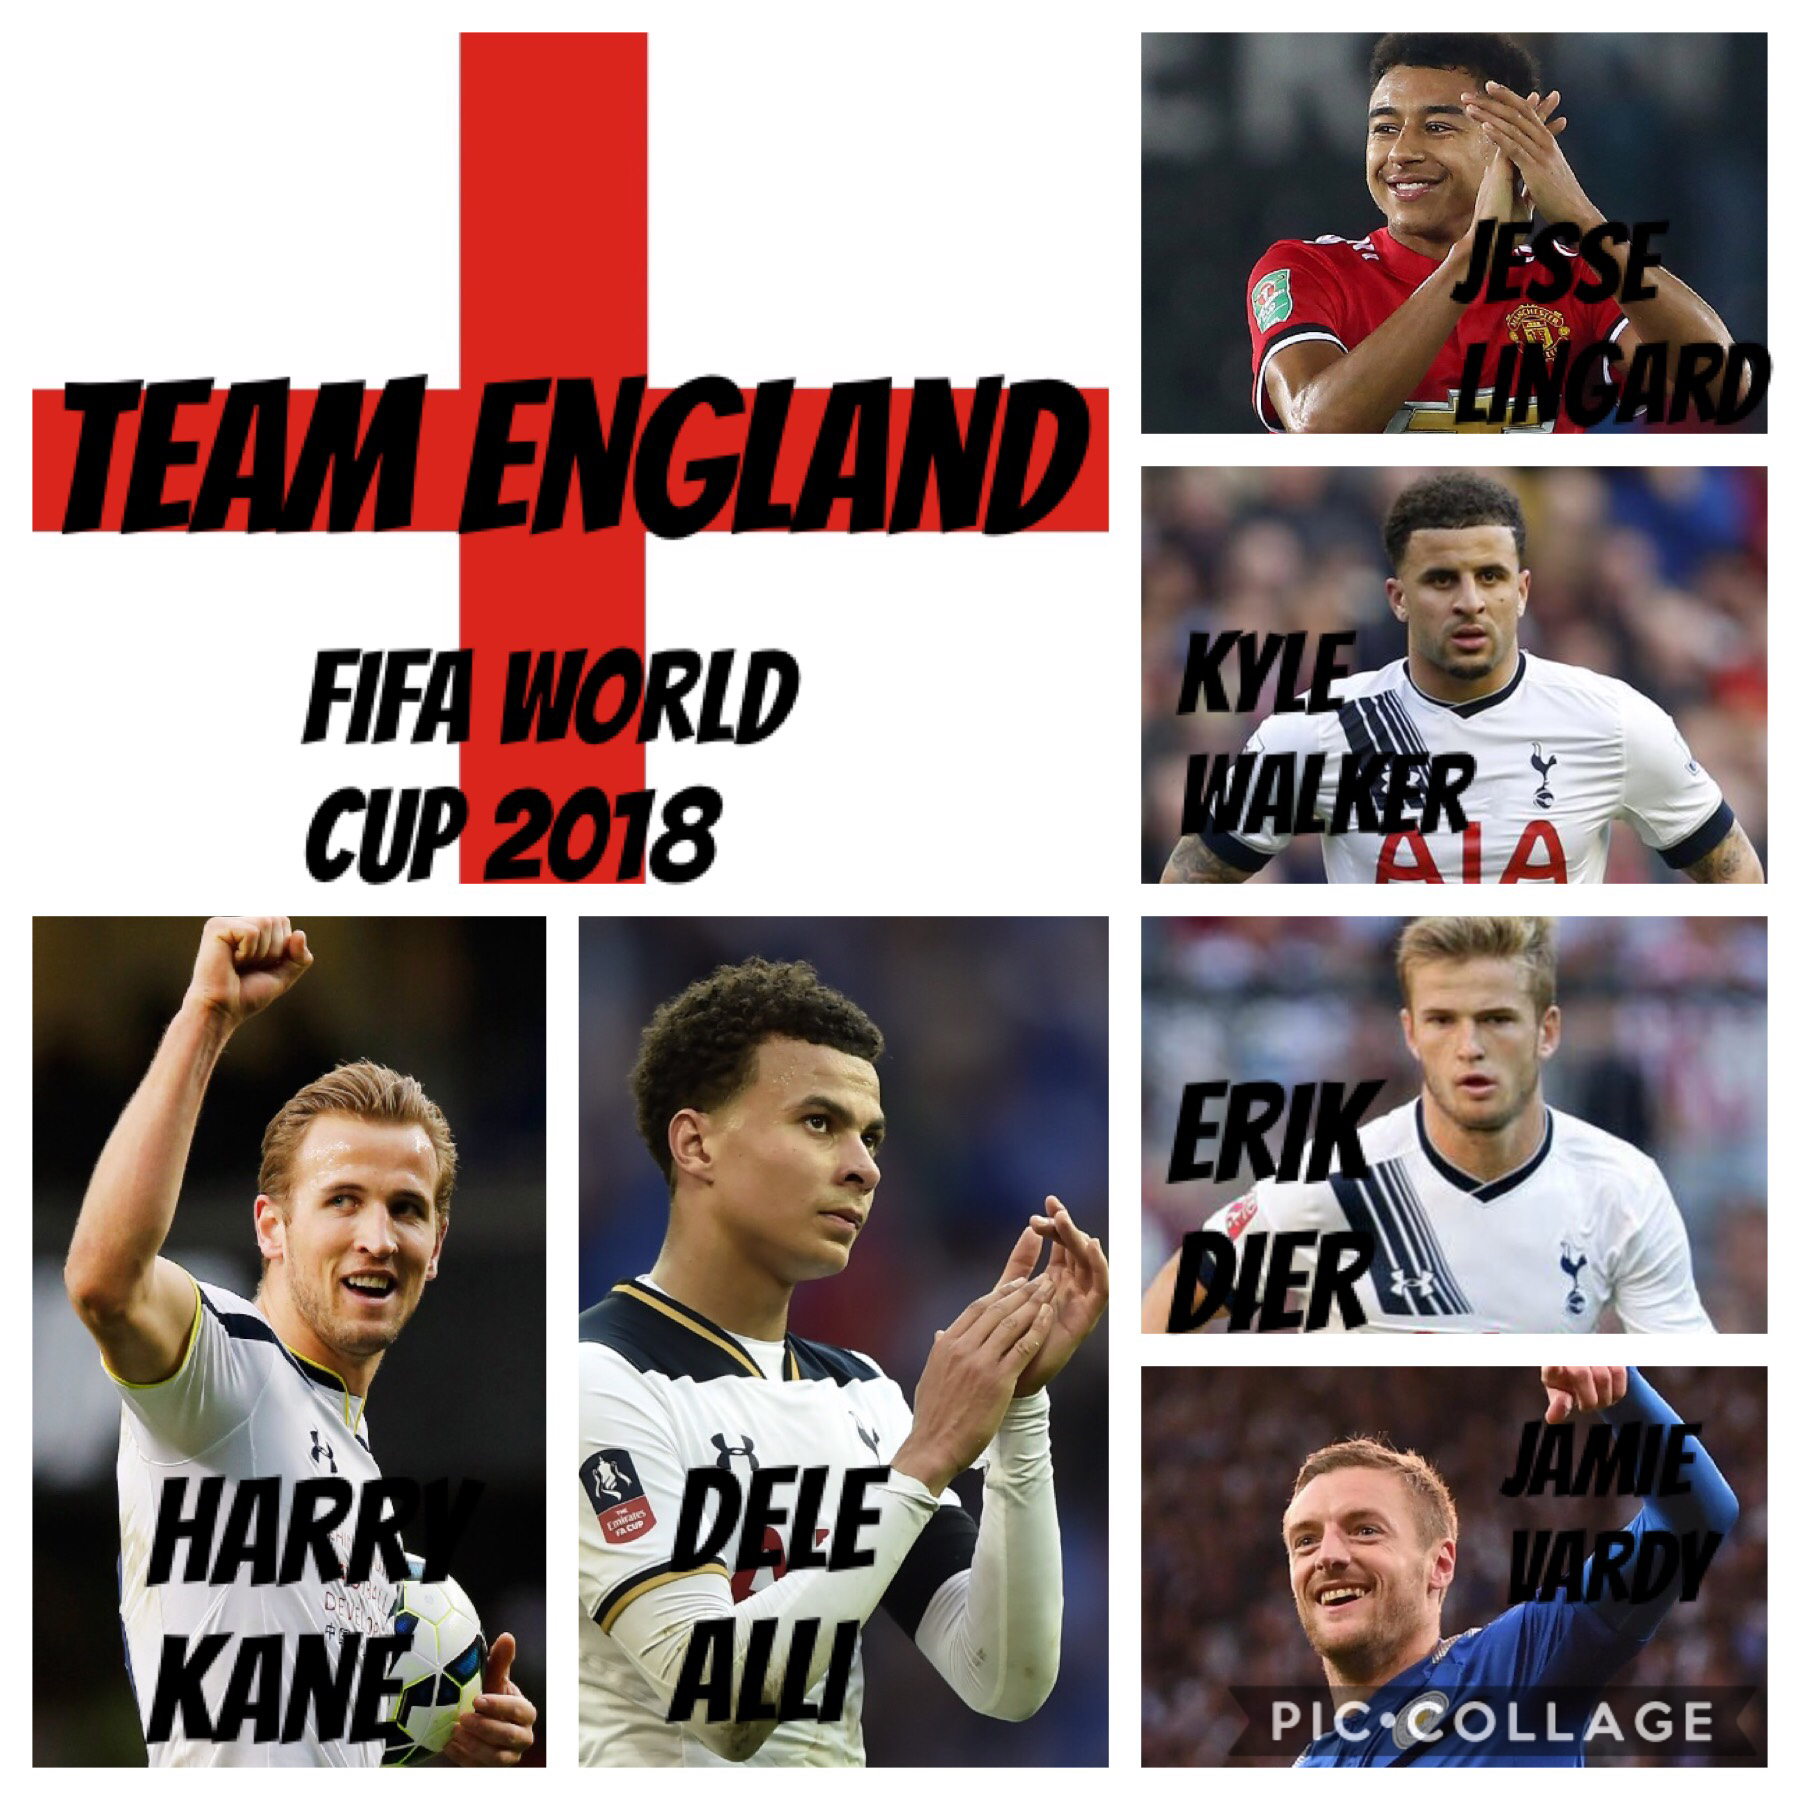 The FIFA 2018 World Cup!
This is the team I’m supporting! If you are into the World Cup please let me know your team!